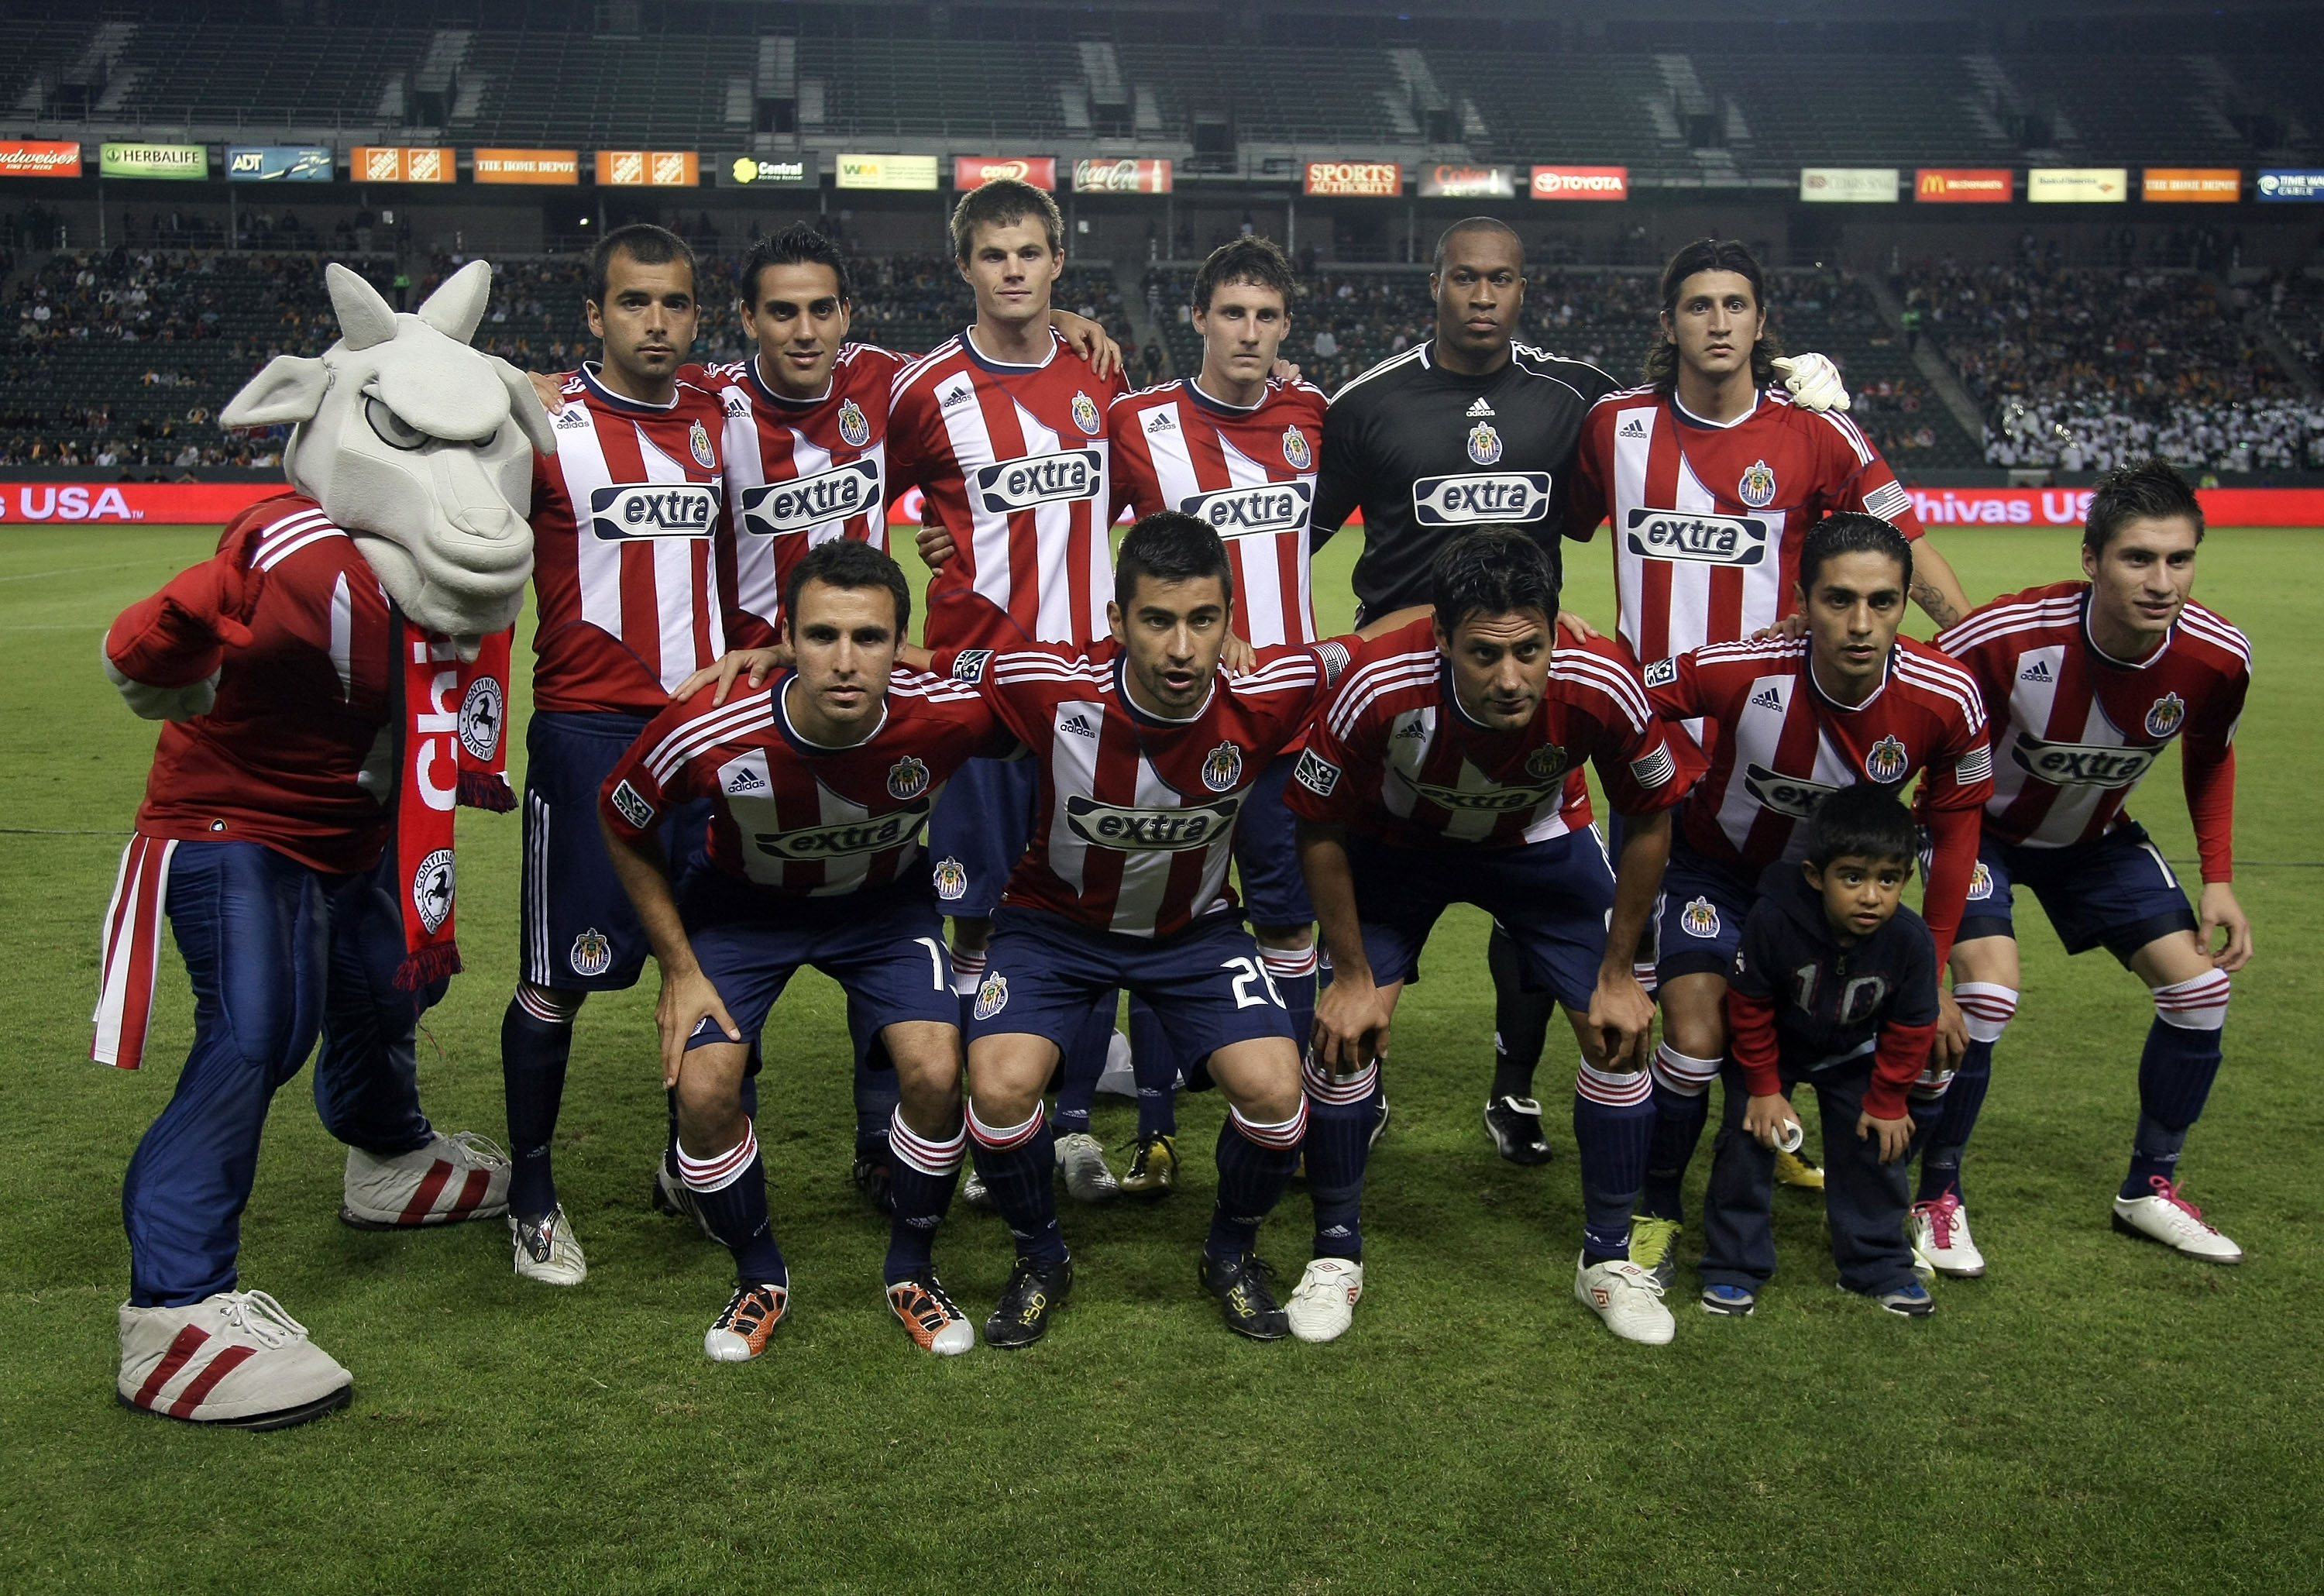 CARSON, CA - OCTOBER 23:  The Chivas USA starting XI pose for a group photo prior to the MLS match on October 23, 2010 in Carson, California.  (Photo by Victor Decolongon/Getty Images)